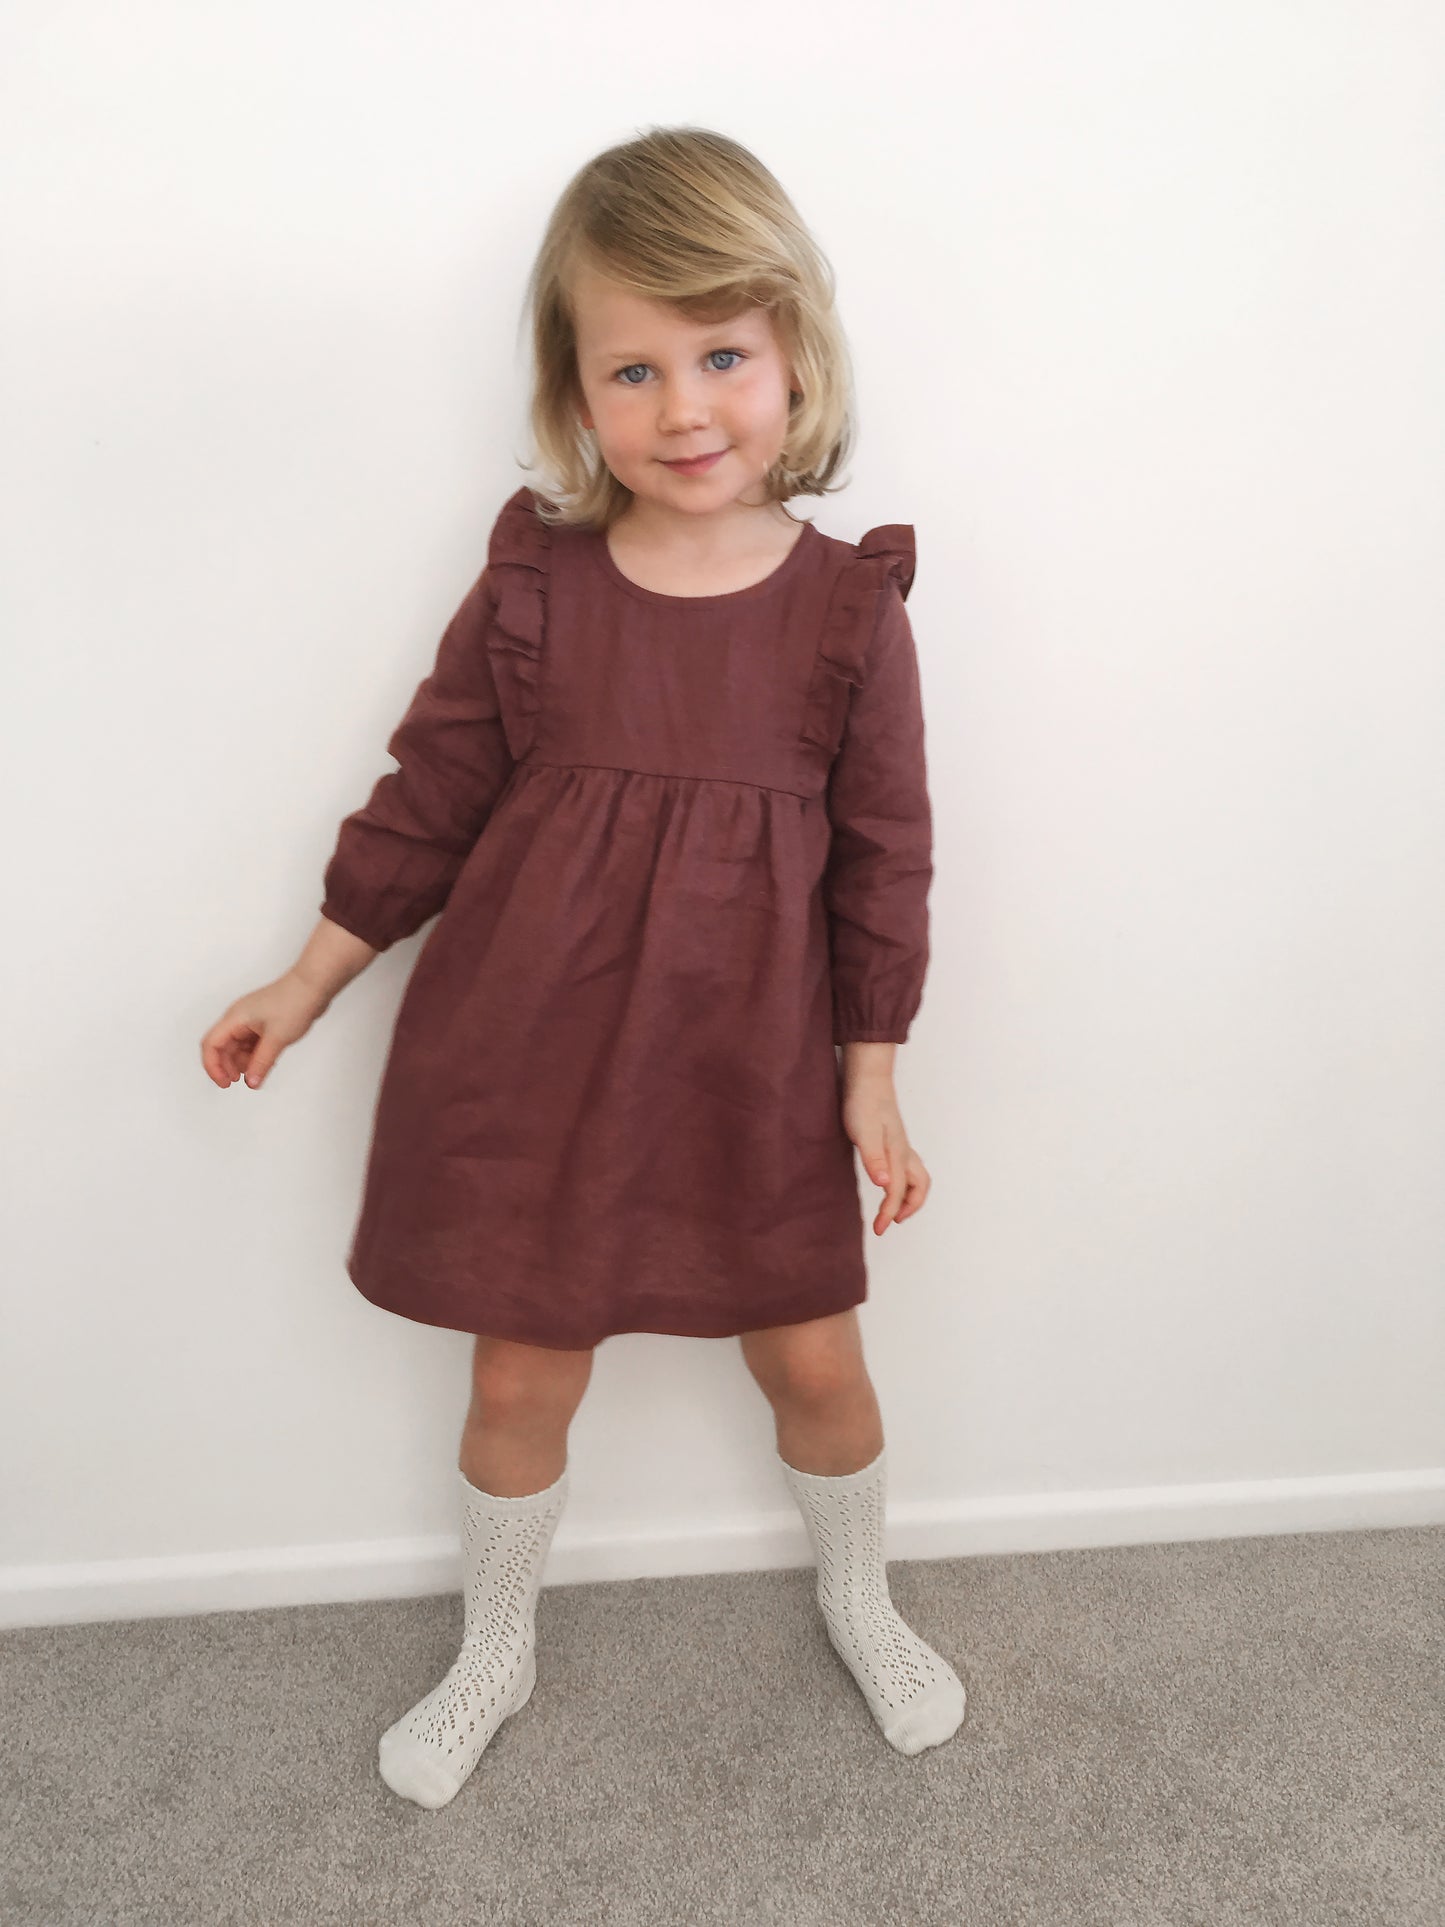 A small girl wearing a burgundy coloured linen dress with ruffle detail on the bodice